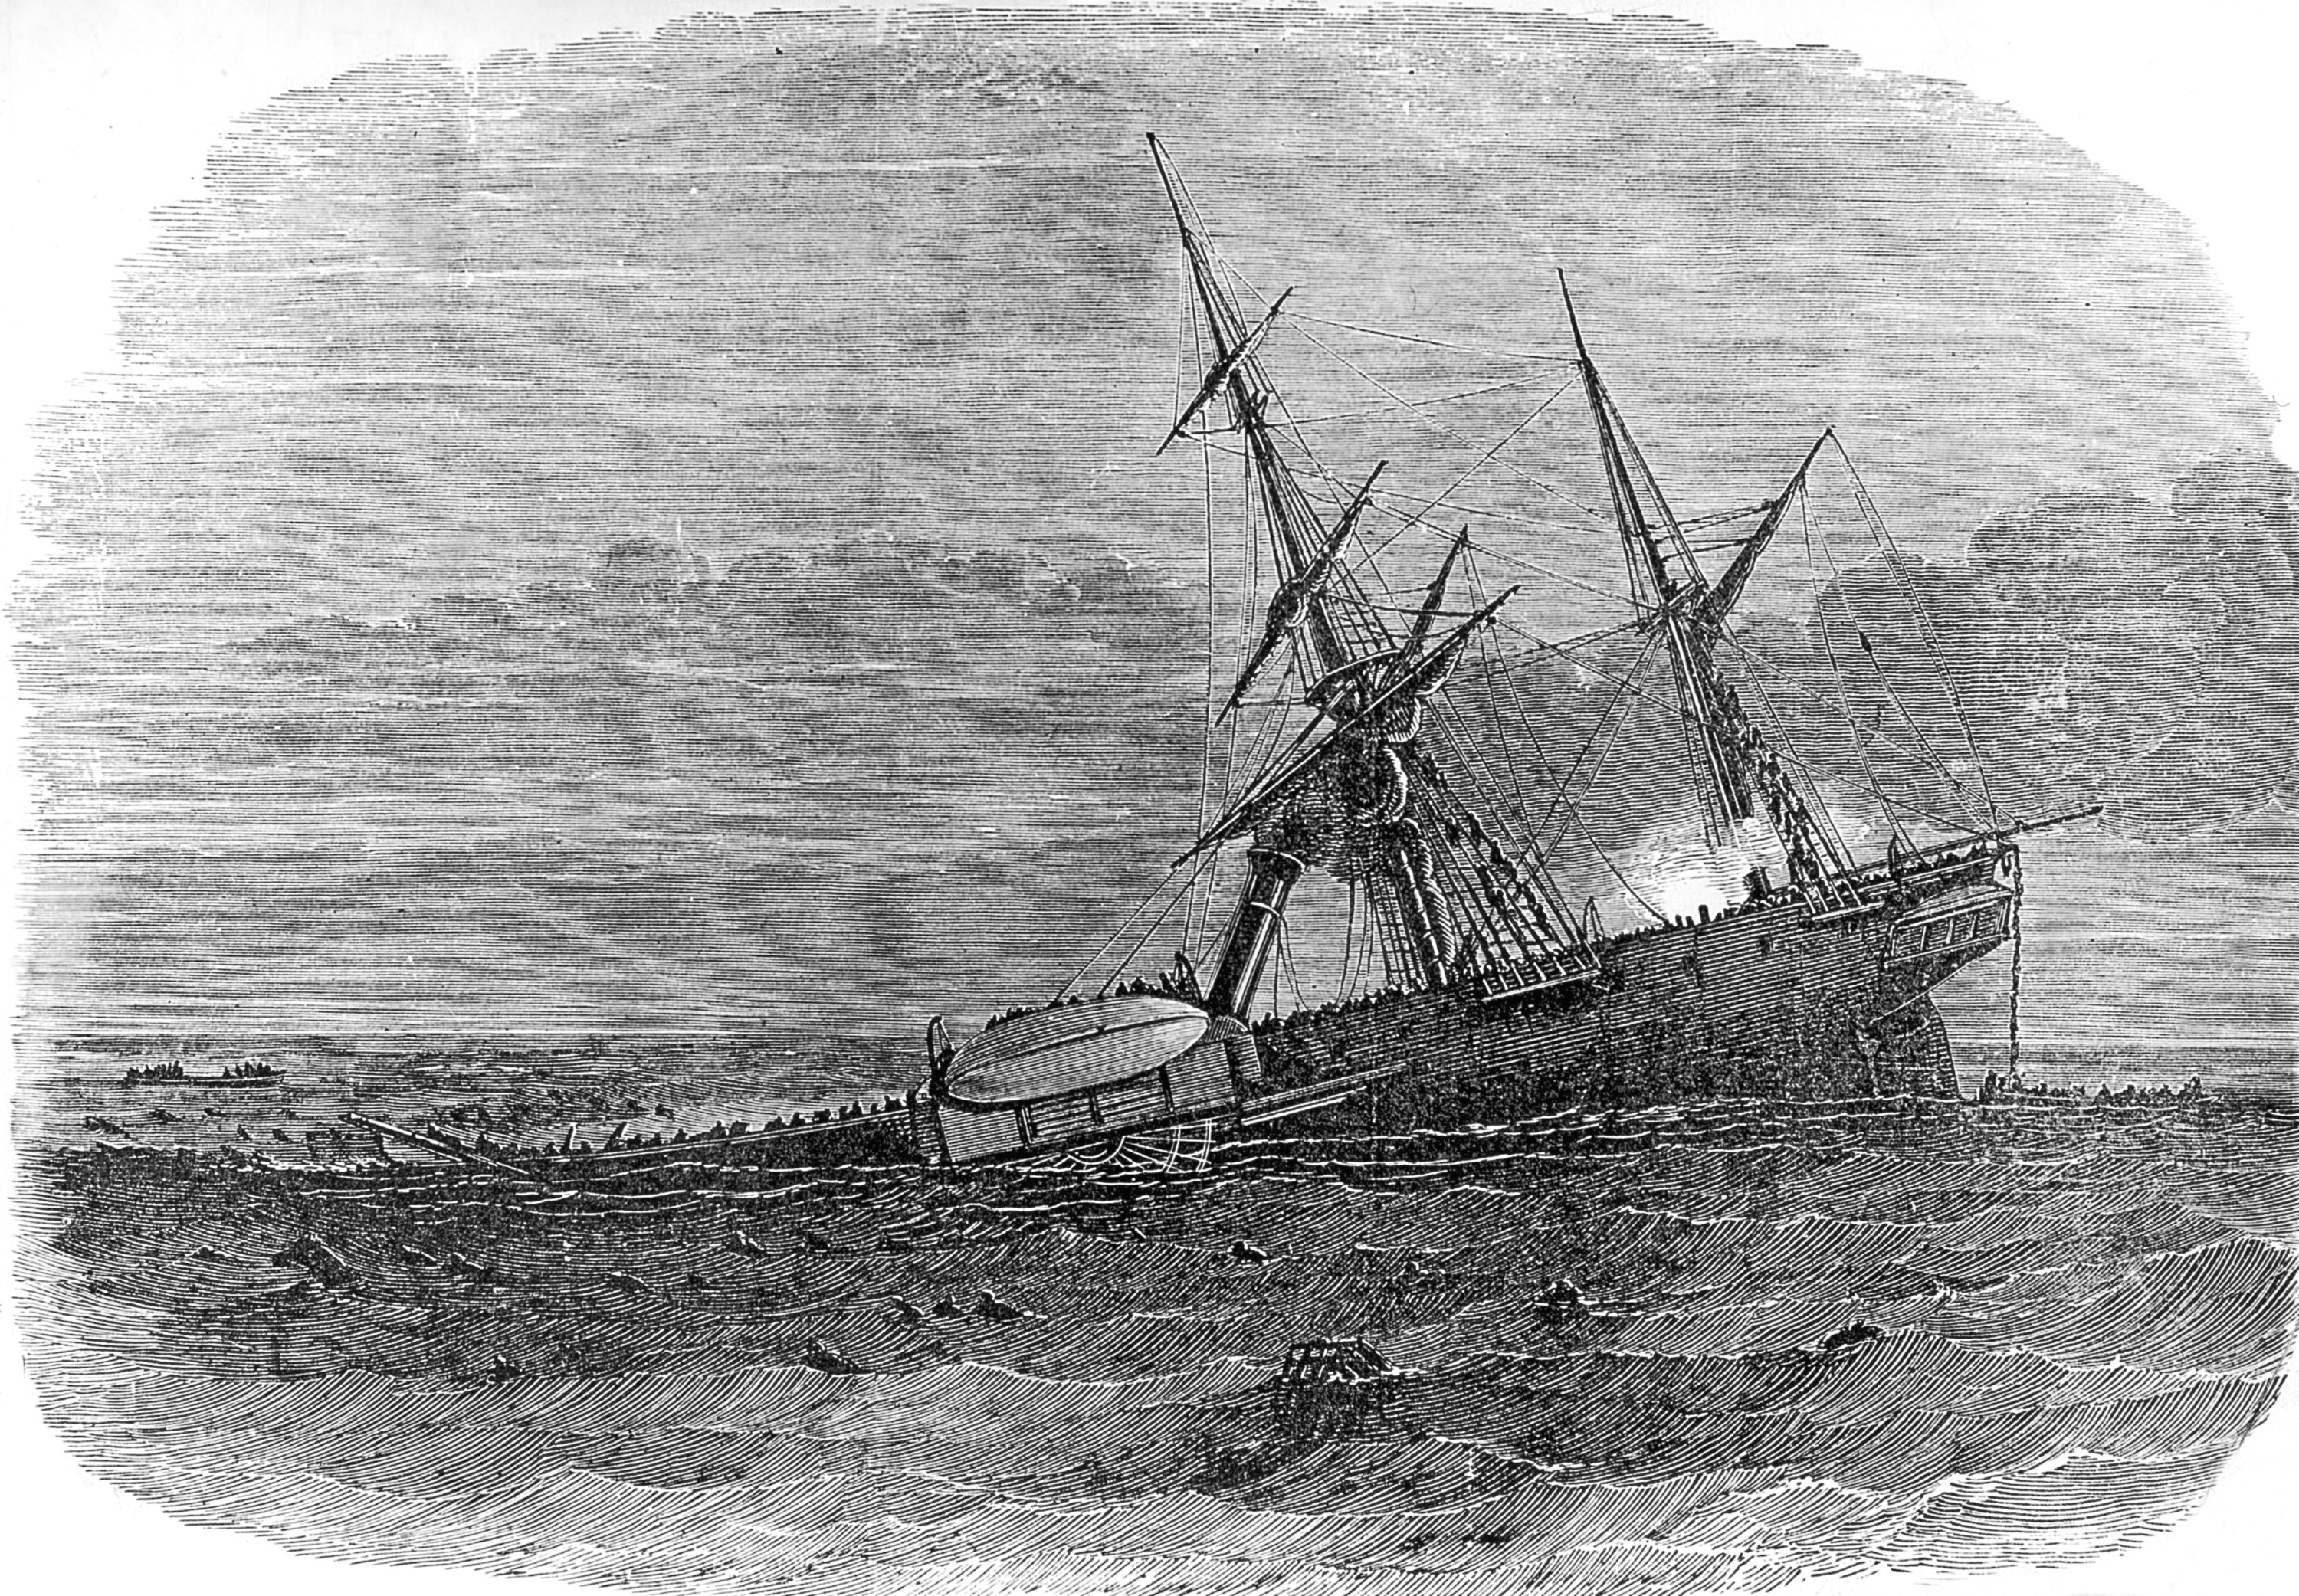 26th February 1852: The British troopship HMS Birkenhead strikes a reef and sinks off Danger Point in South Africa, with the loss of 445 lives. She was carrying soldiers to fight in the Eighth Frontier War in the Eastern Cape. (Photo by Hulton Archive/Getty Images)